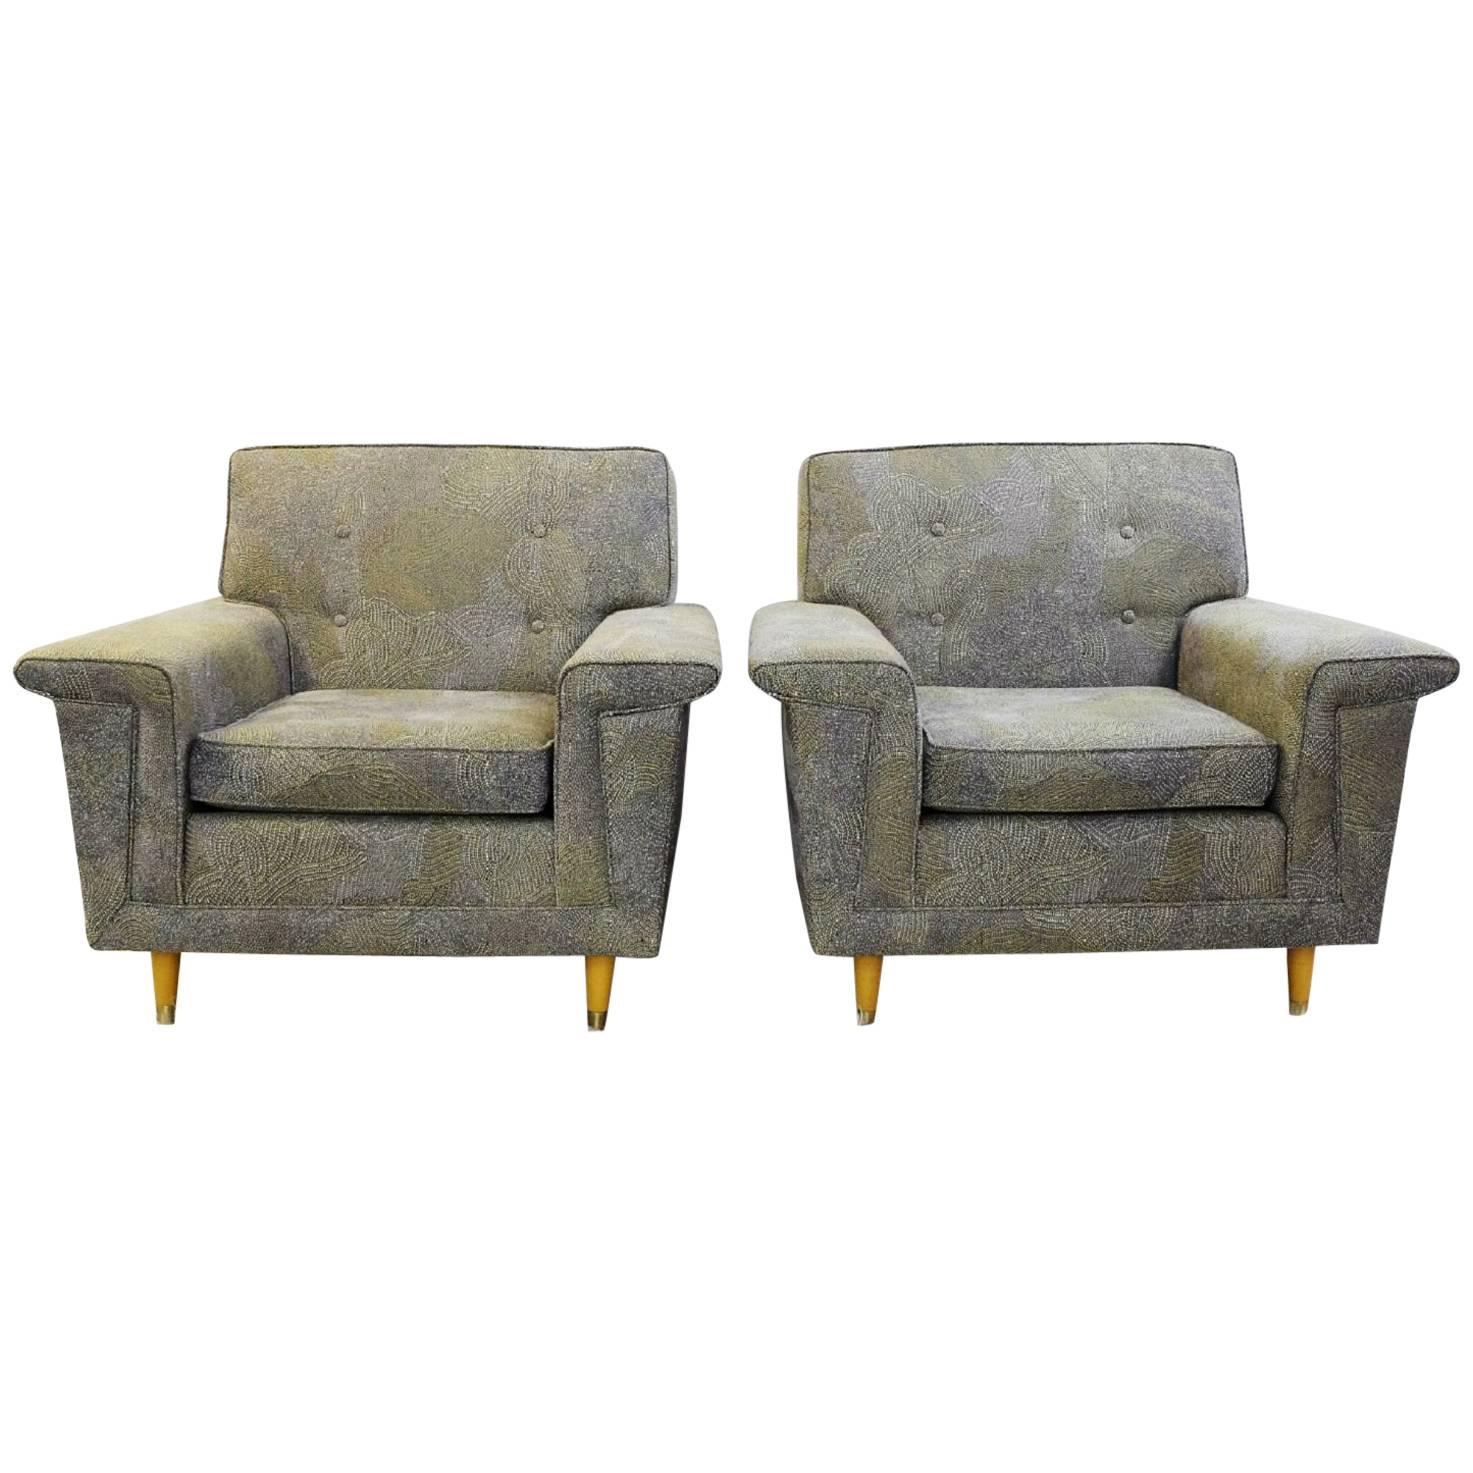 Pair of American Armchairs, Rowe - New Upholstery by Pierre Frey Collection